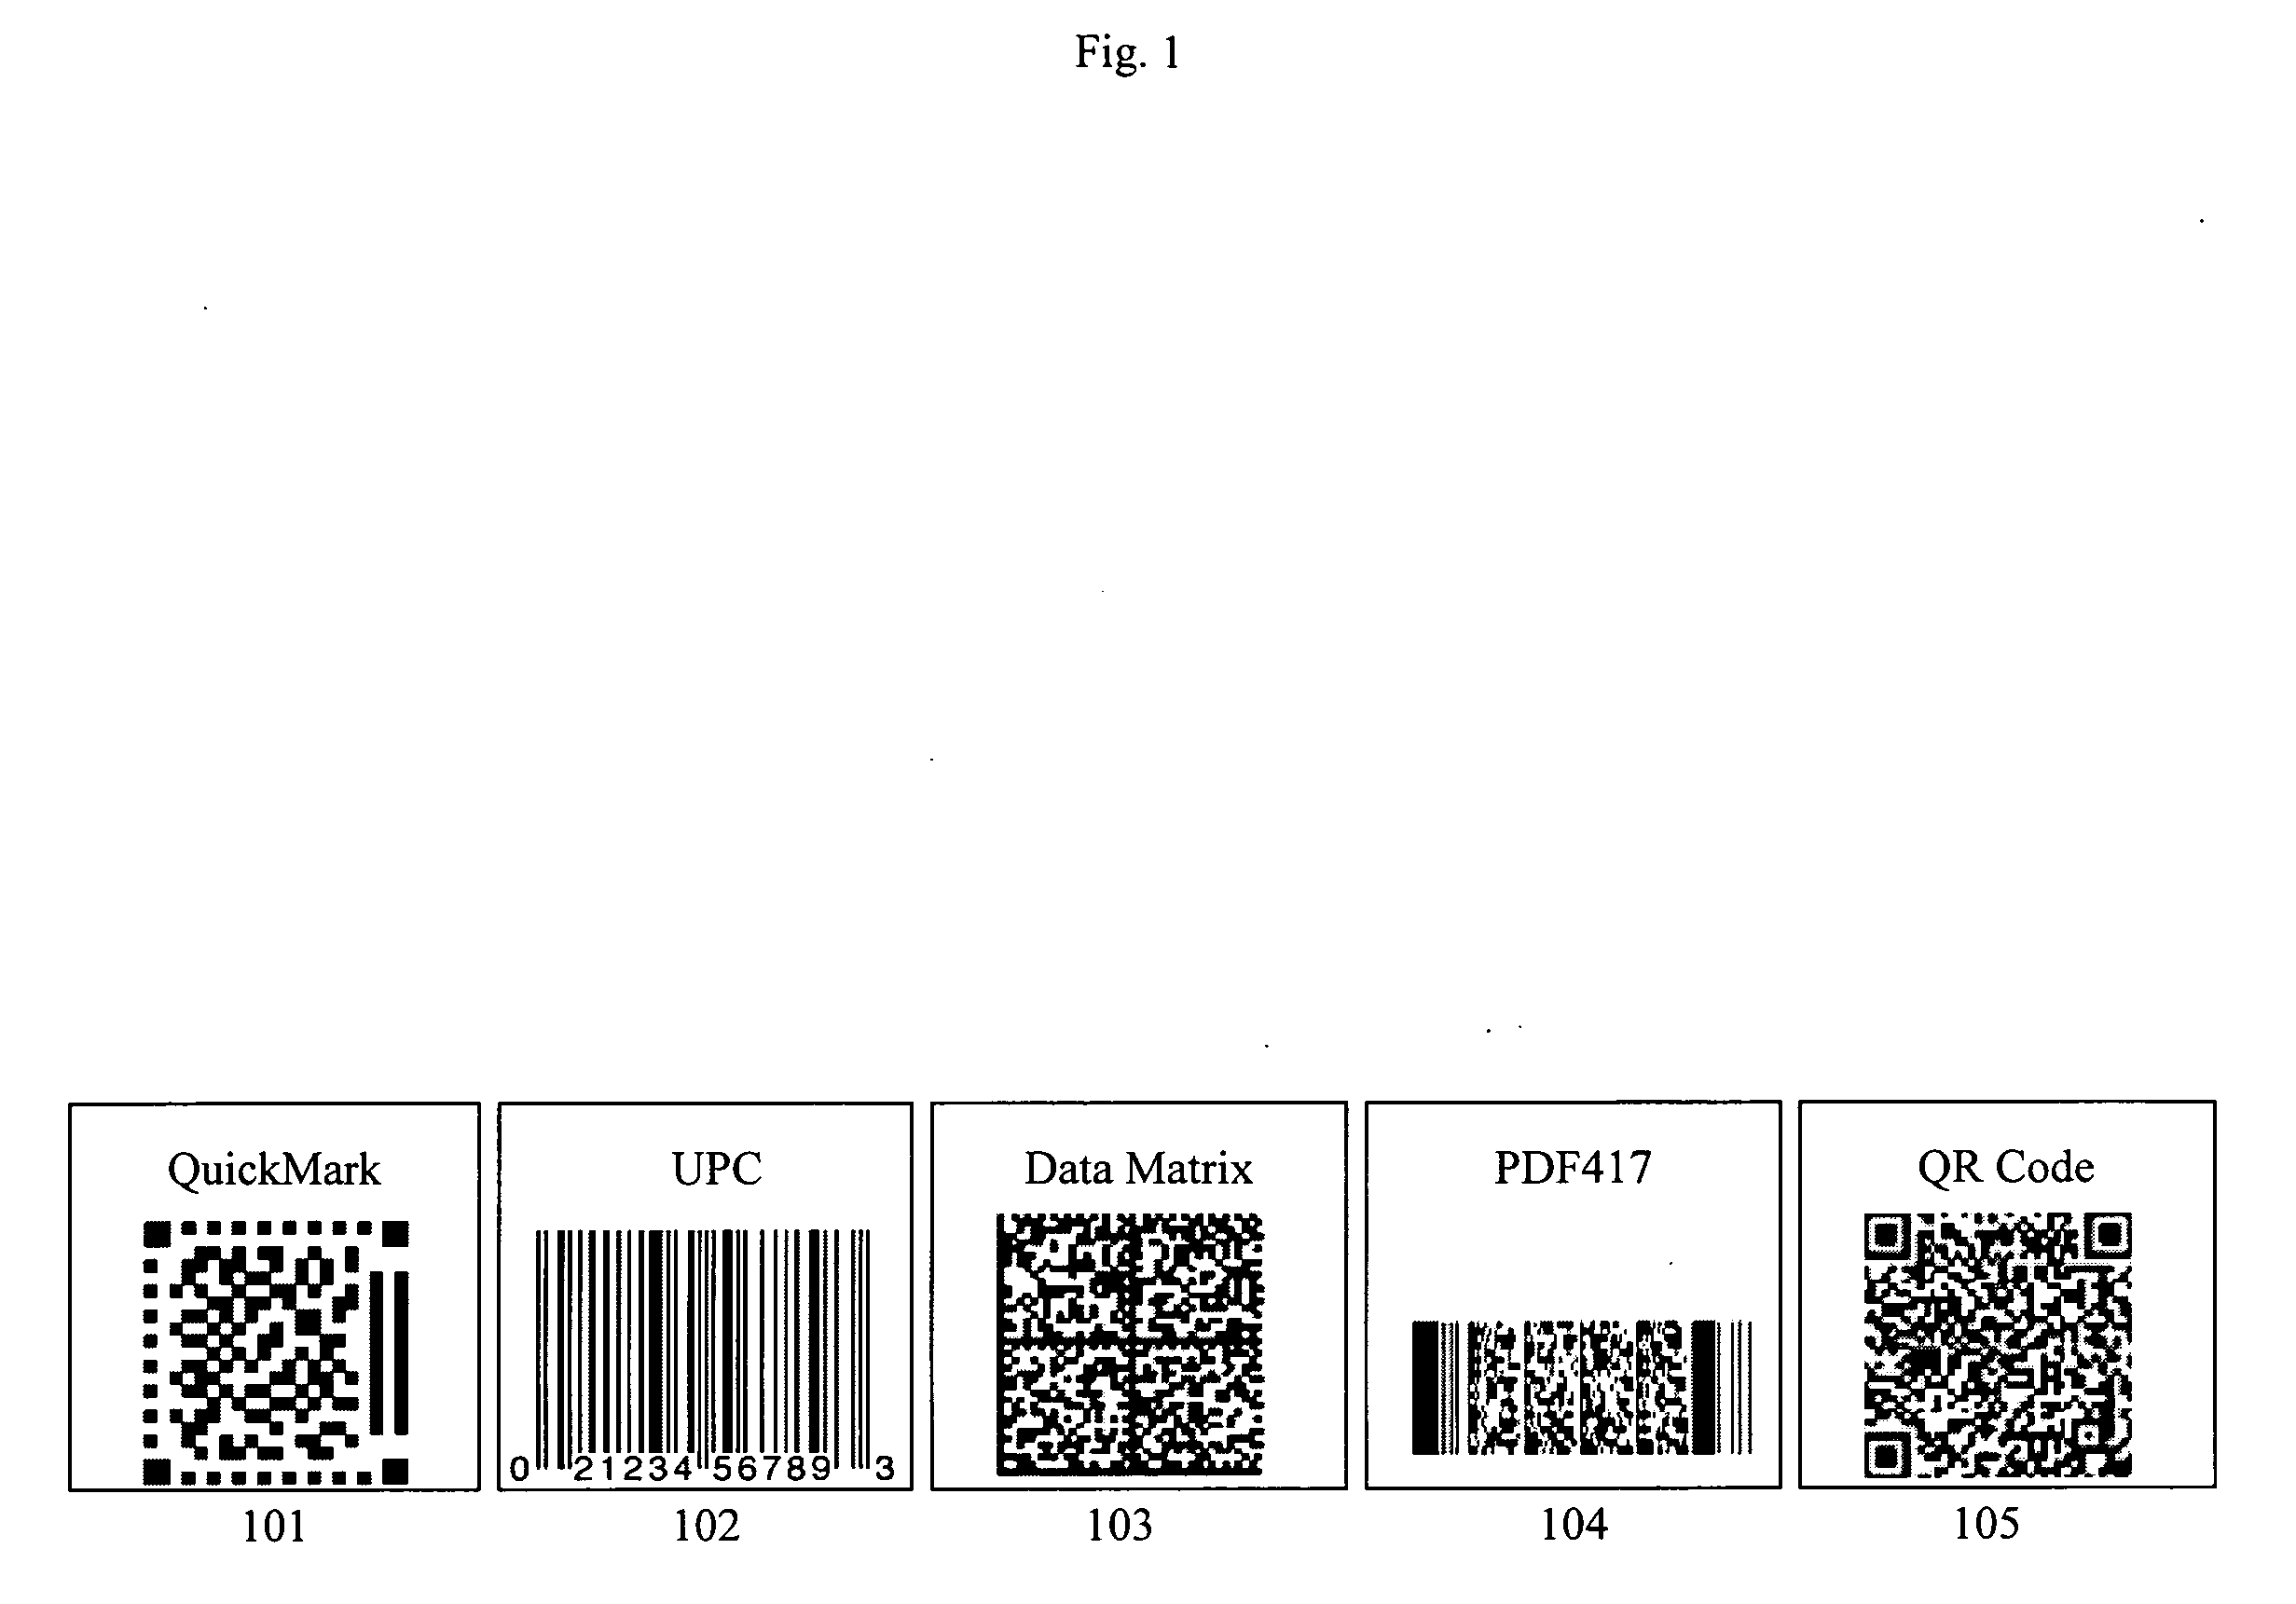 System and method for information retrieval with barcode using digital image capture devices